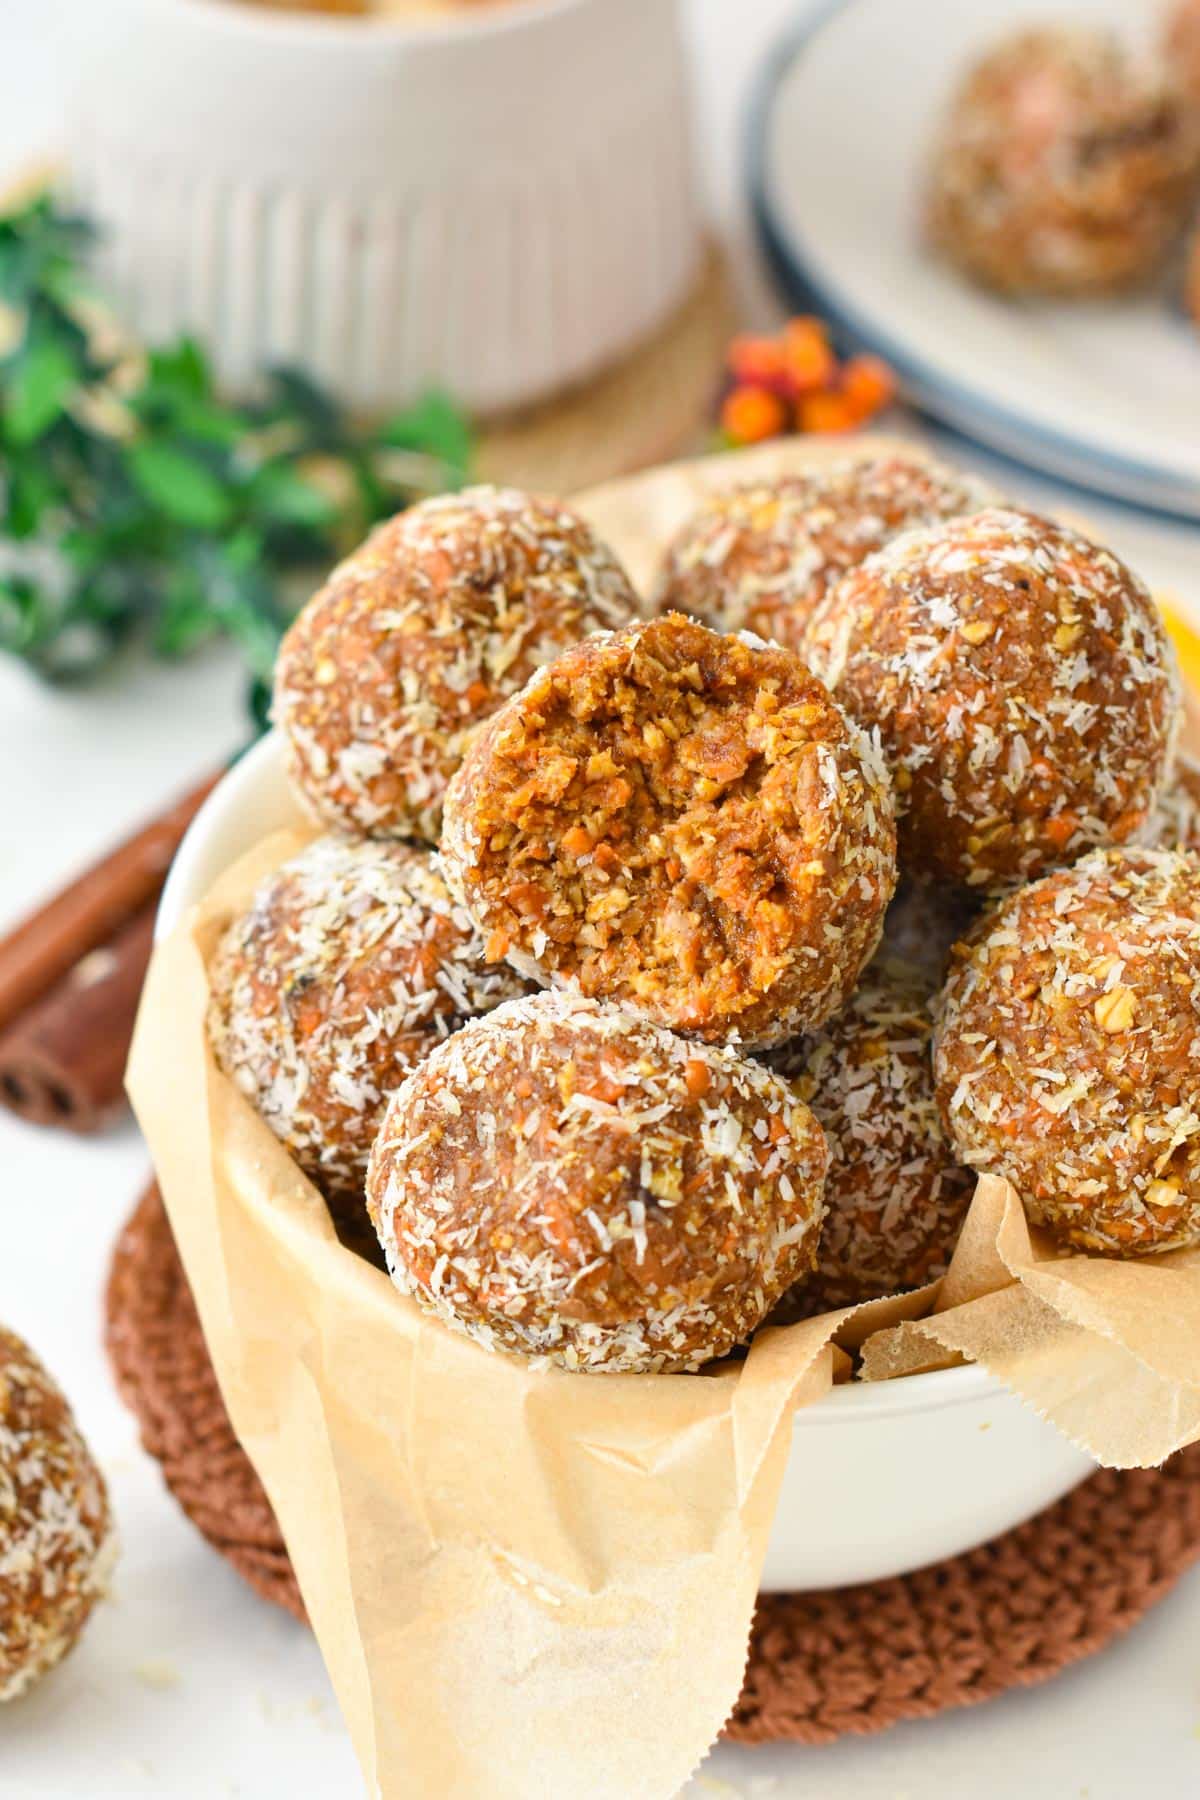 A bowl filled with a stack of no-bake carrot cake energy bites made with dates, nuts, and carrots.